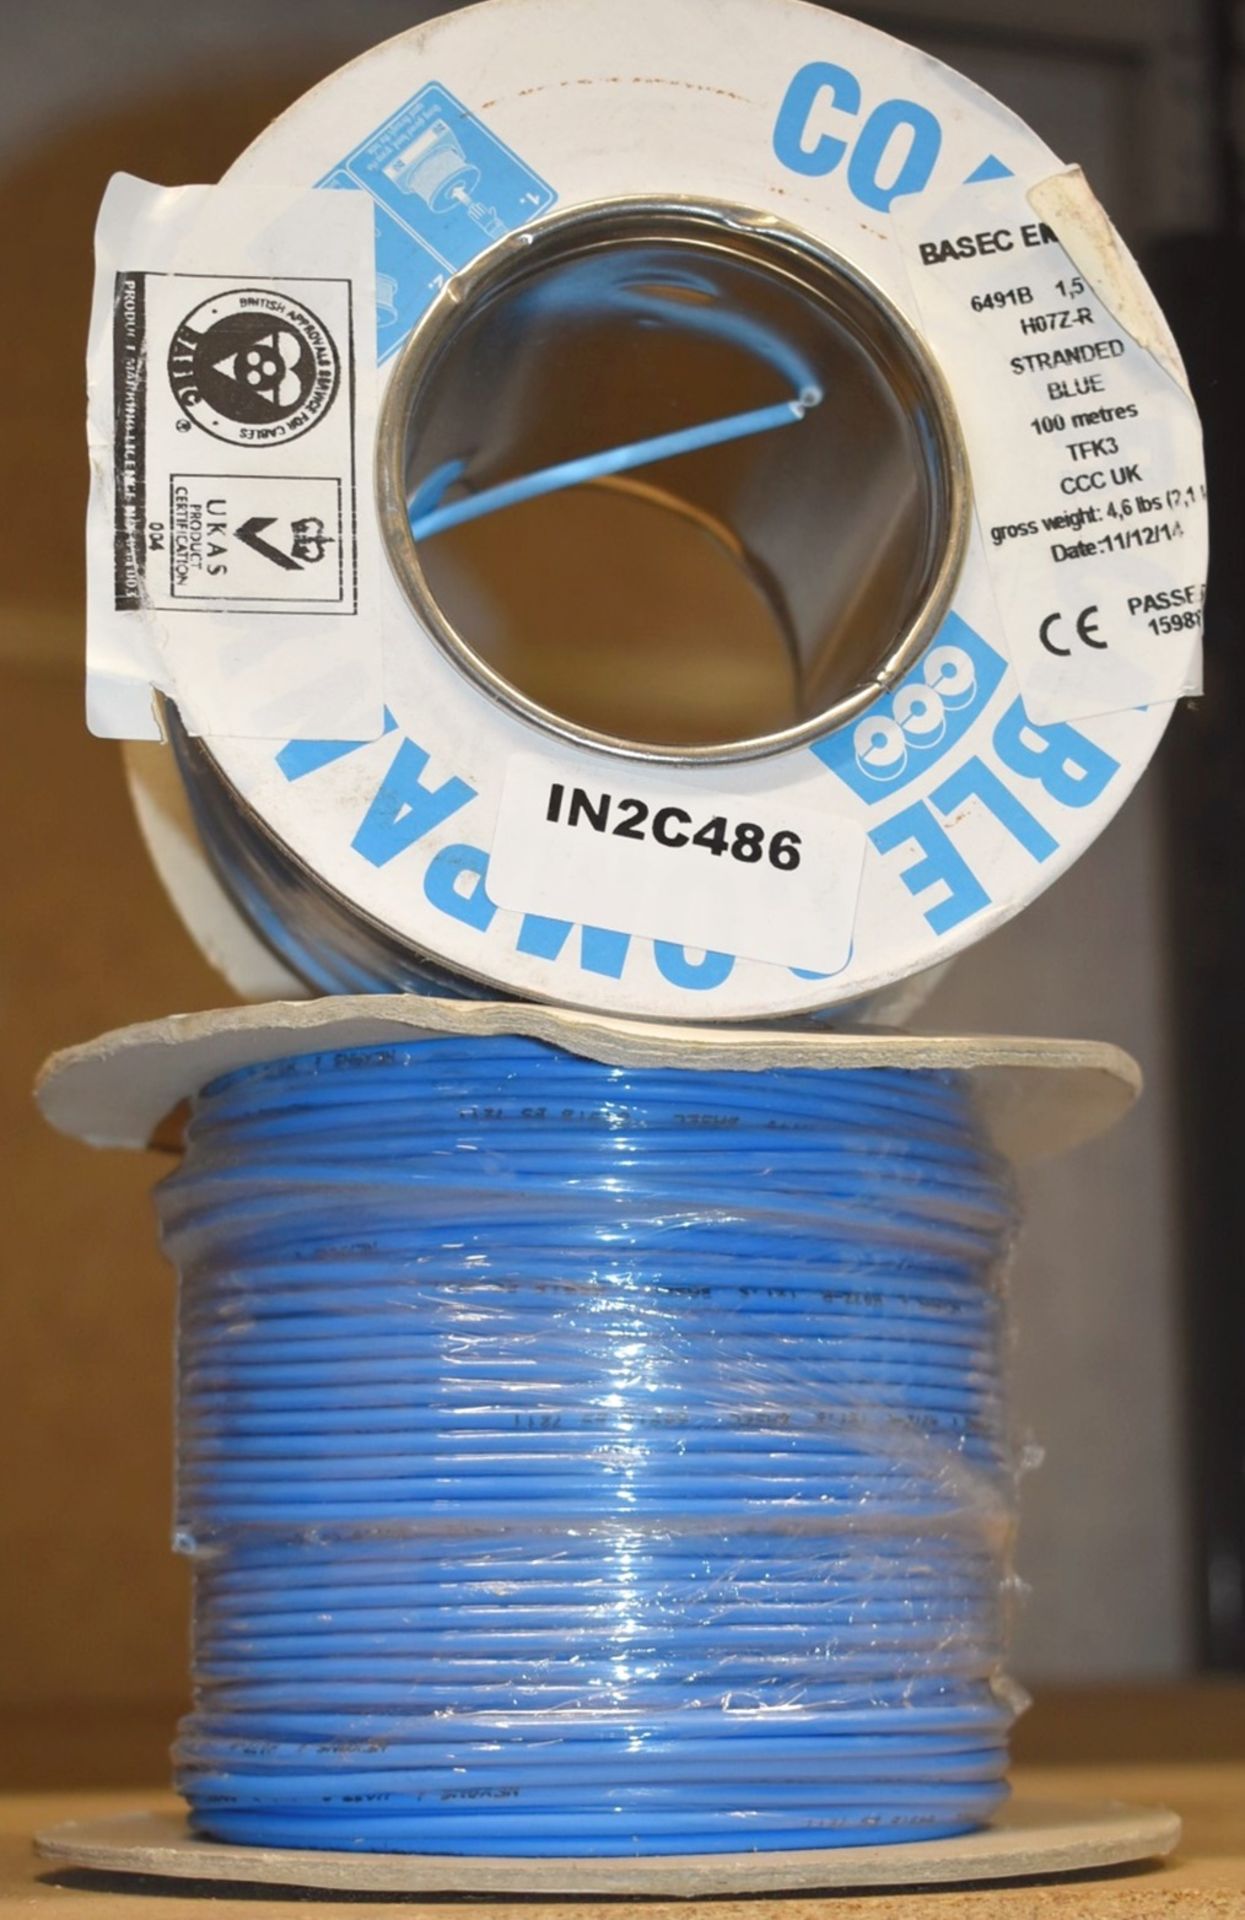 2 x Reels of 100m 1.5mm Blue 6491B H07Z-R Electrical Cable - Unused Stock - Image 3 of 6